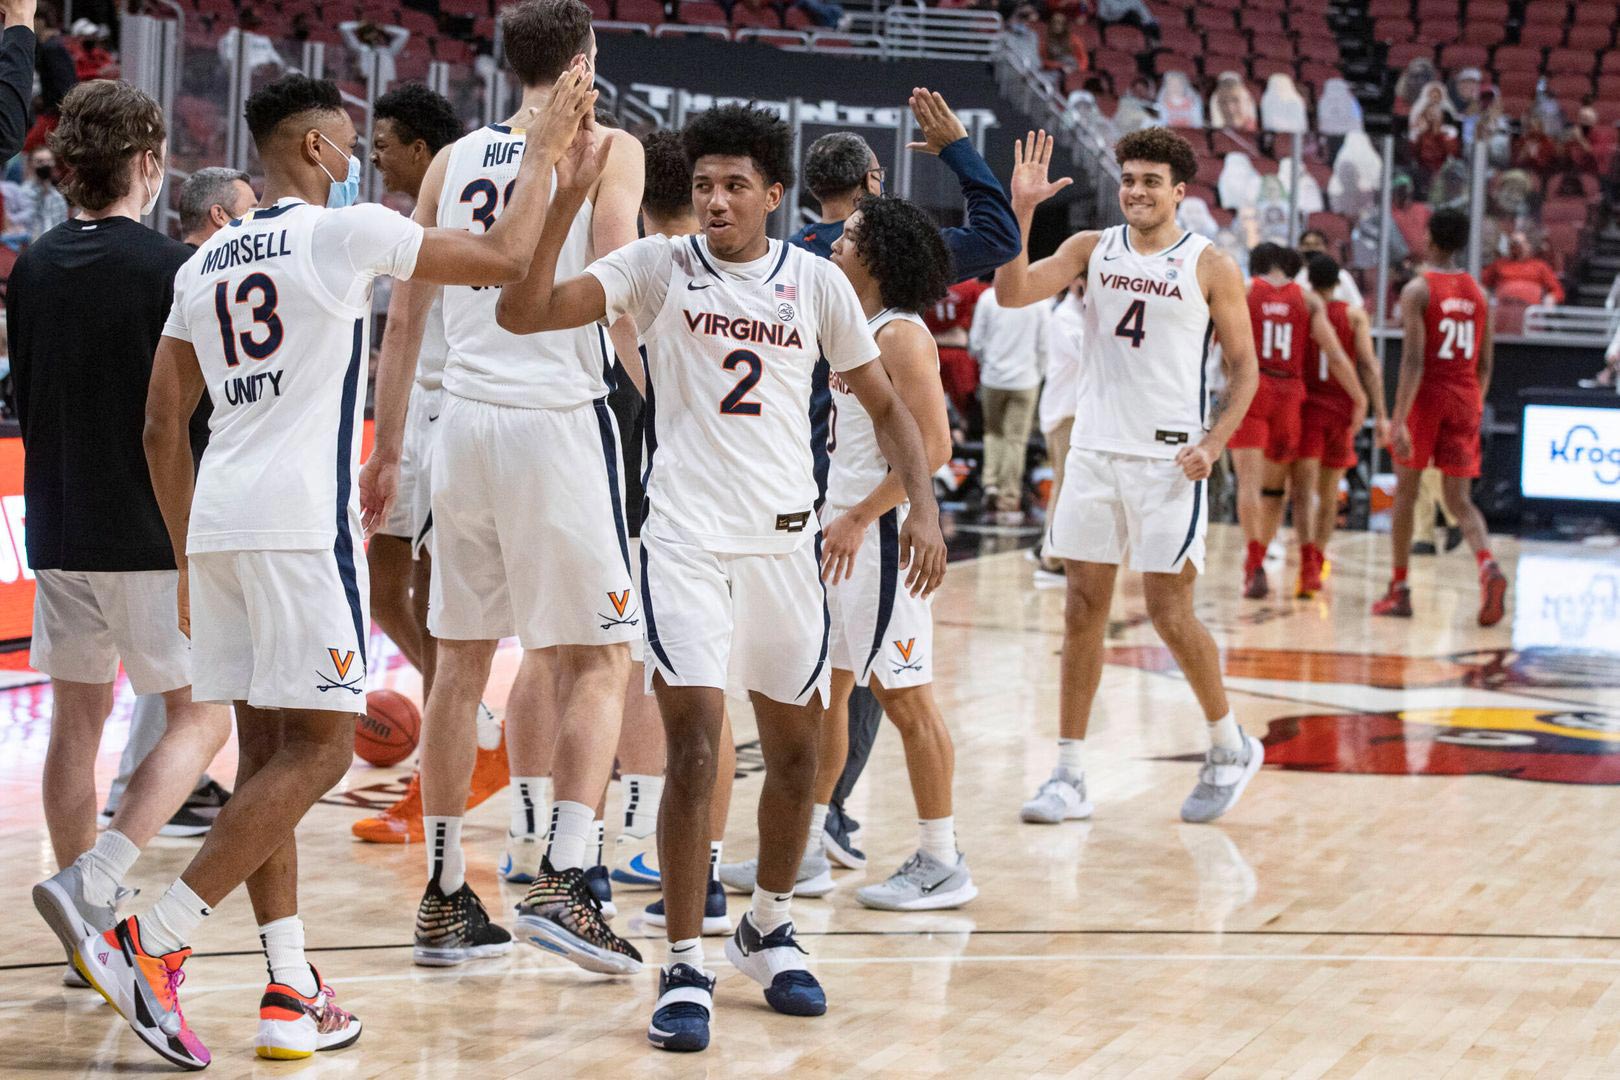 UVA basketball players exchanging high fives on the court after a victory against Louisvile